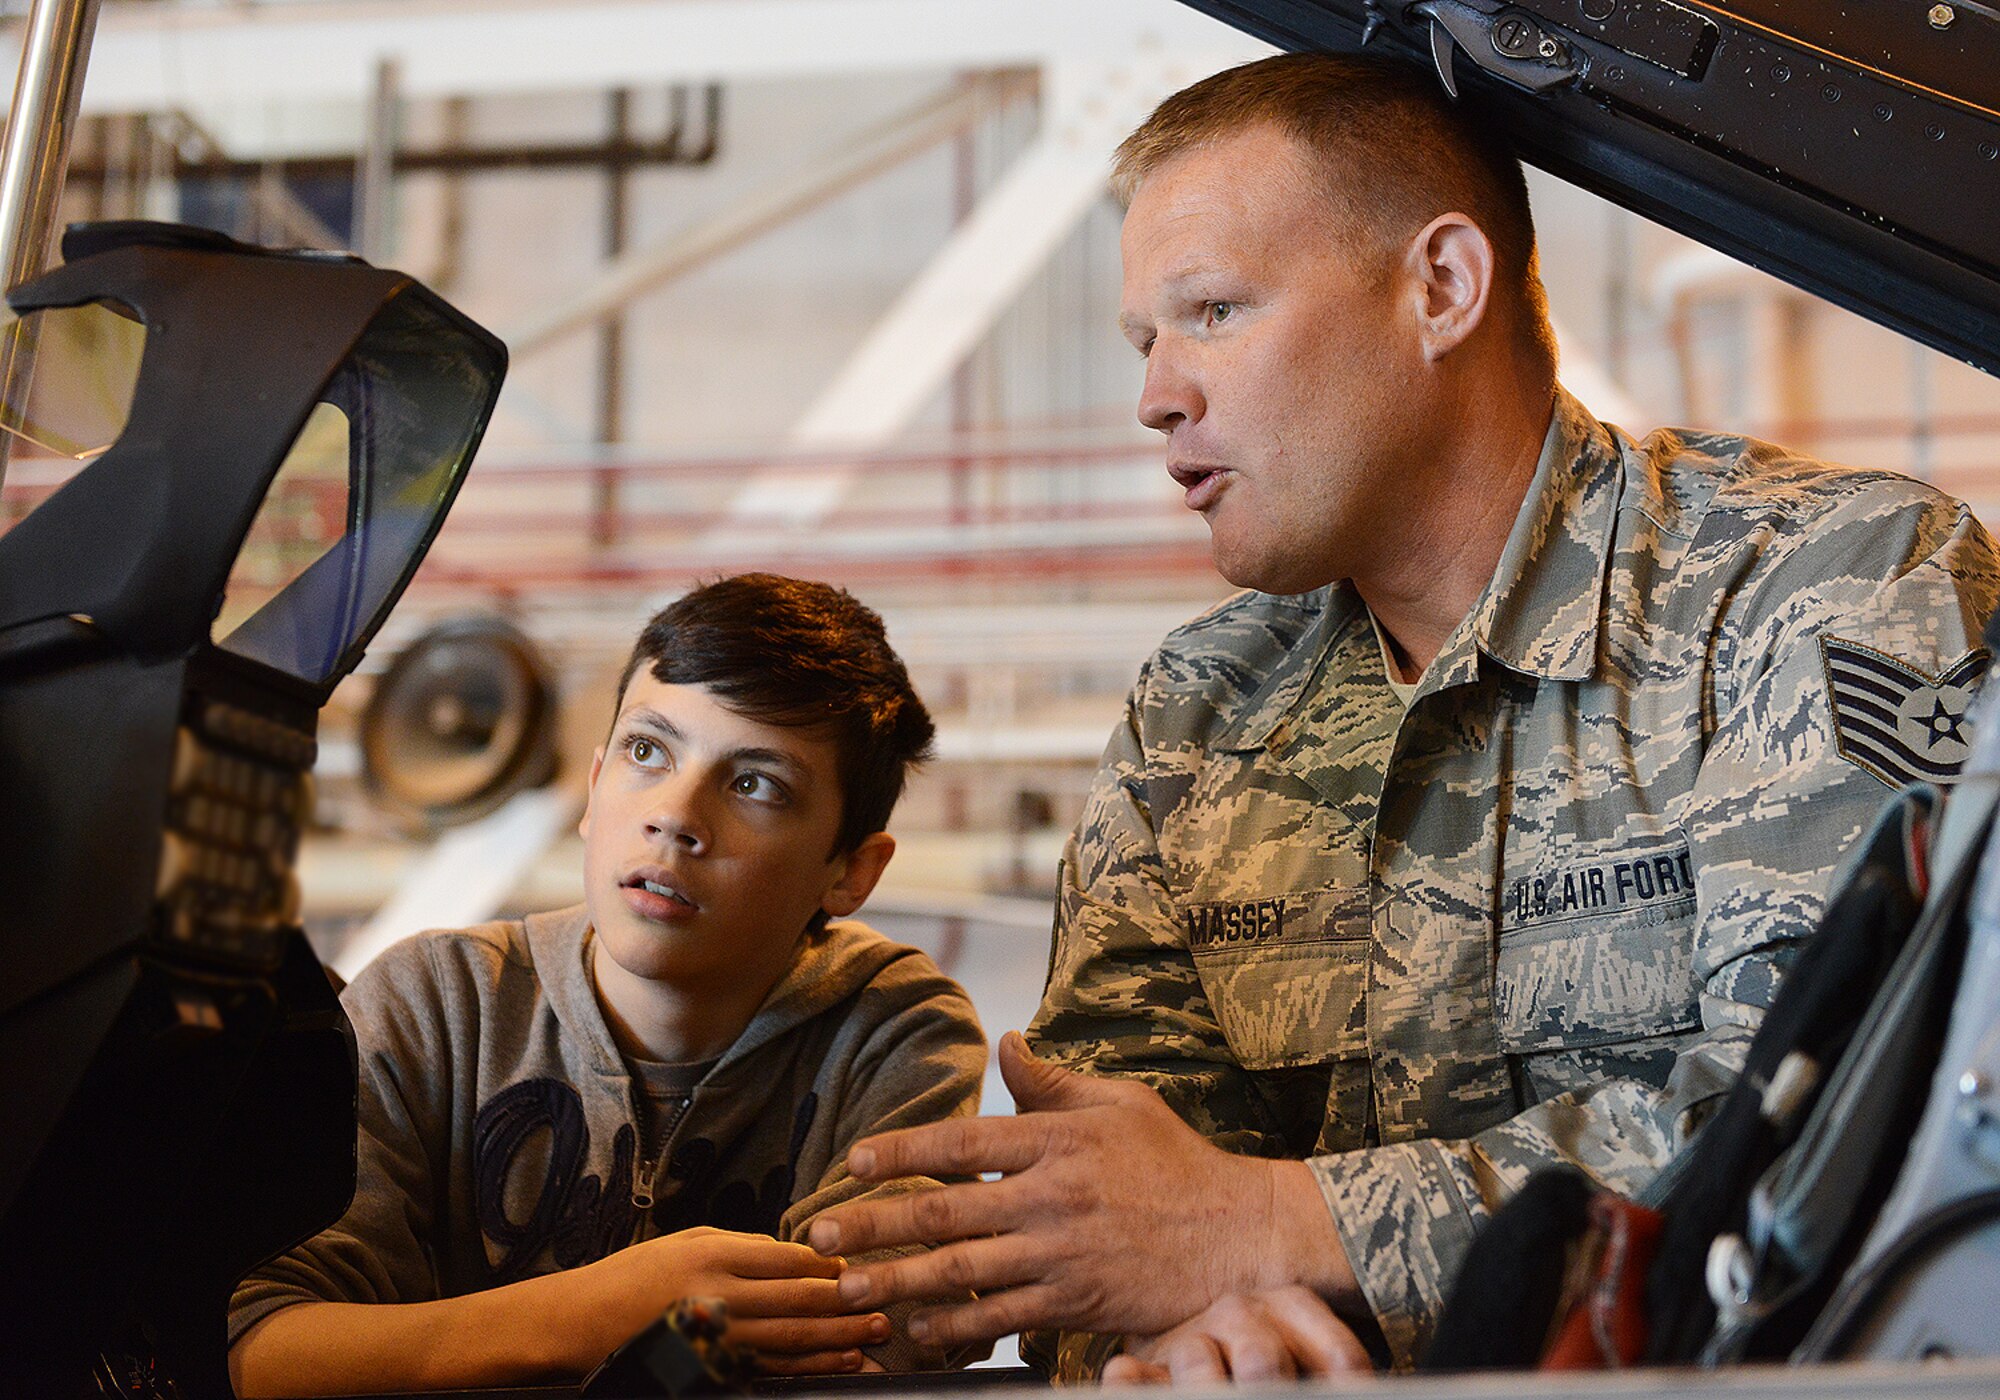 Tech. Sgt. Brian Massey, 138th Aircraft Maintenance Squadron, talks to John Hill Jr., son of Tech. Sgt. John Hill, 138th Contracting Office, about the capabilities of the F-16 at the Tulsa Air National Guard Base, Okla., 23 April, 2015, during "National Take Our Daughters and Sons to Work Day".   The 138th participated in the event as a way to give children an insight into what their parents do, as well as demonstrating to them what is involved day to day in a job or career.  (U.S. National Guard photo by Senior Master Sgt.  Preston L. Chasteen/Released)